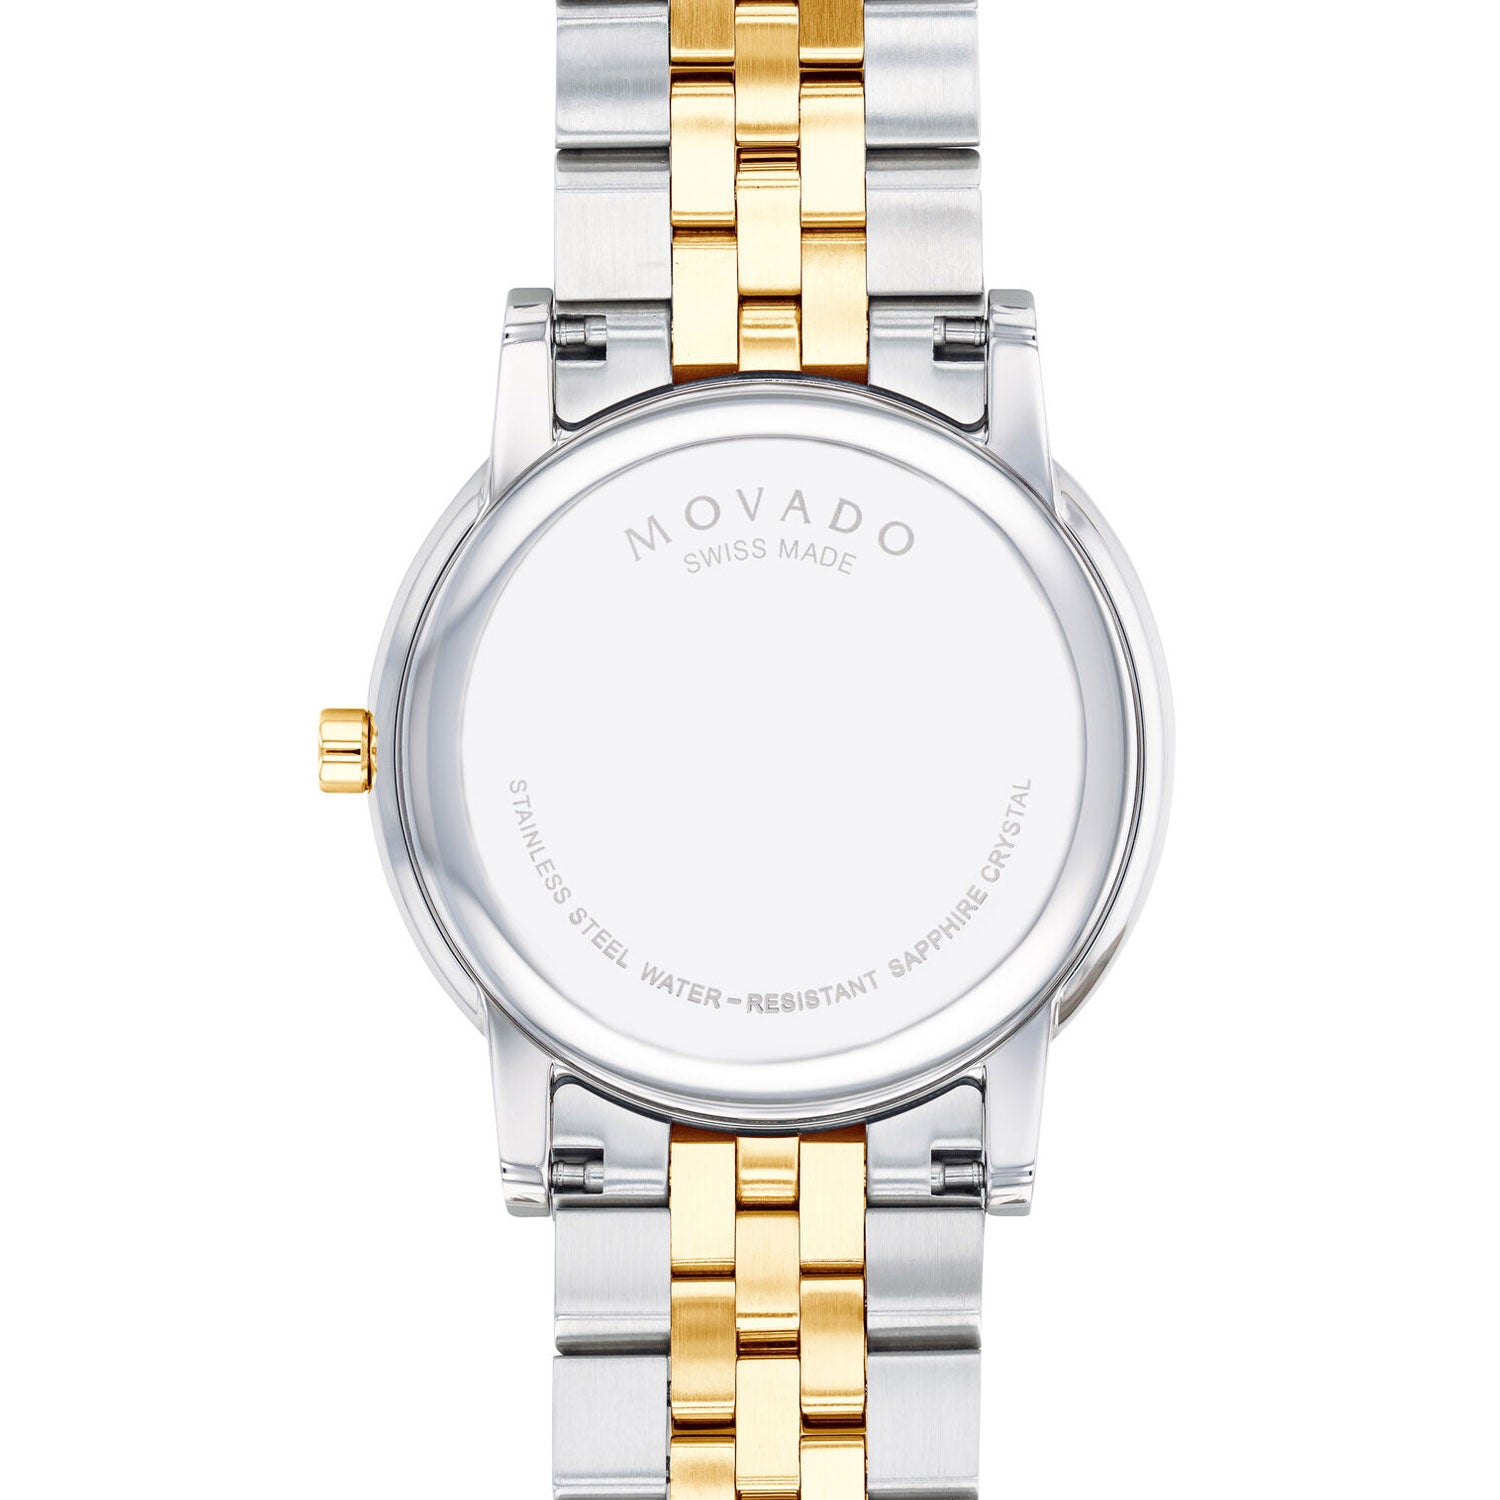 Movado Museum Classic Mens Diamond Watch with Black Dial and Stainless Steel and Yellow Gold Toned Bracelet (Swiss quartz movement)